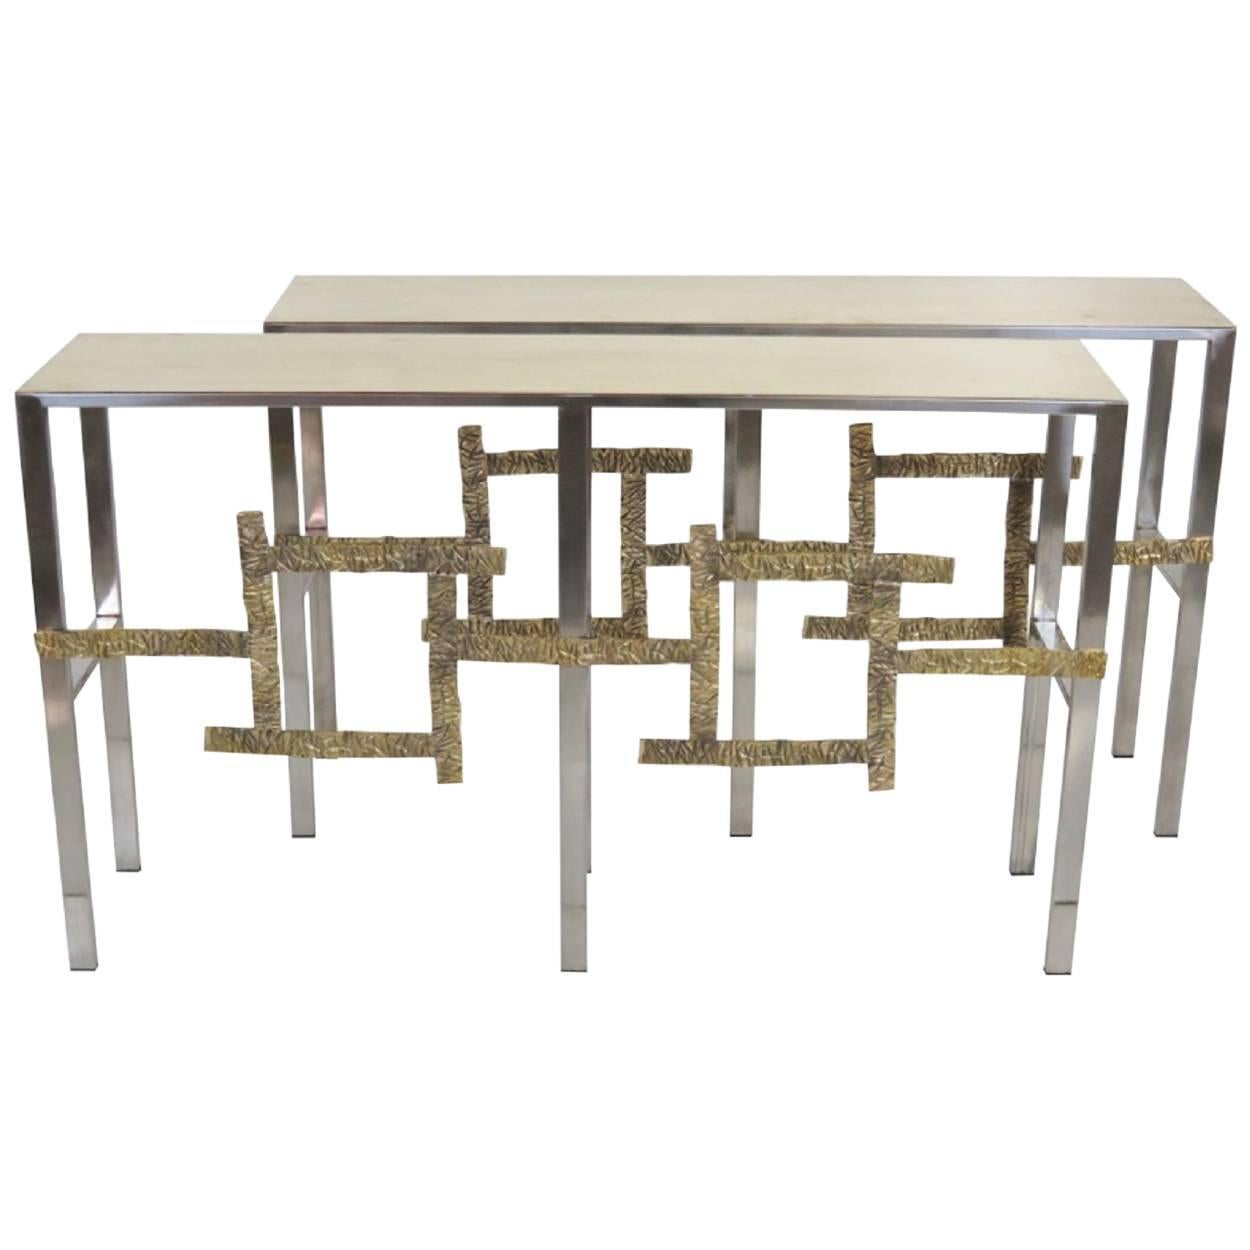 Pair of Italian Chrome and Brass Sculptural Consoles